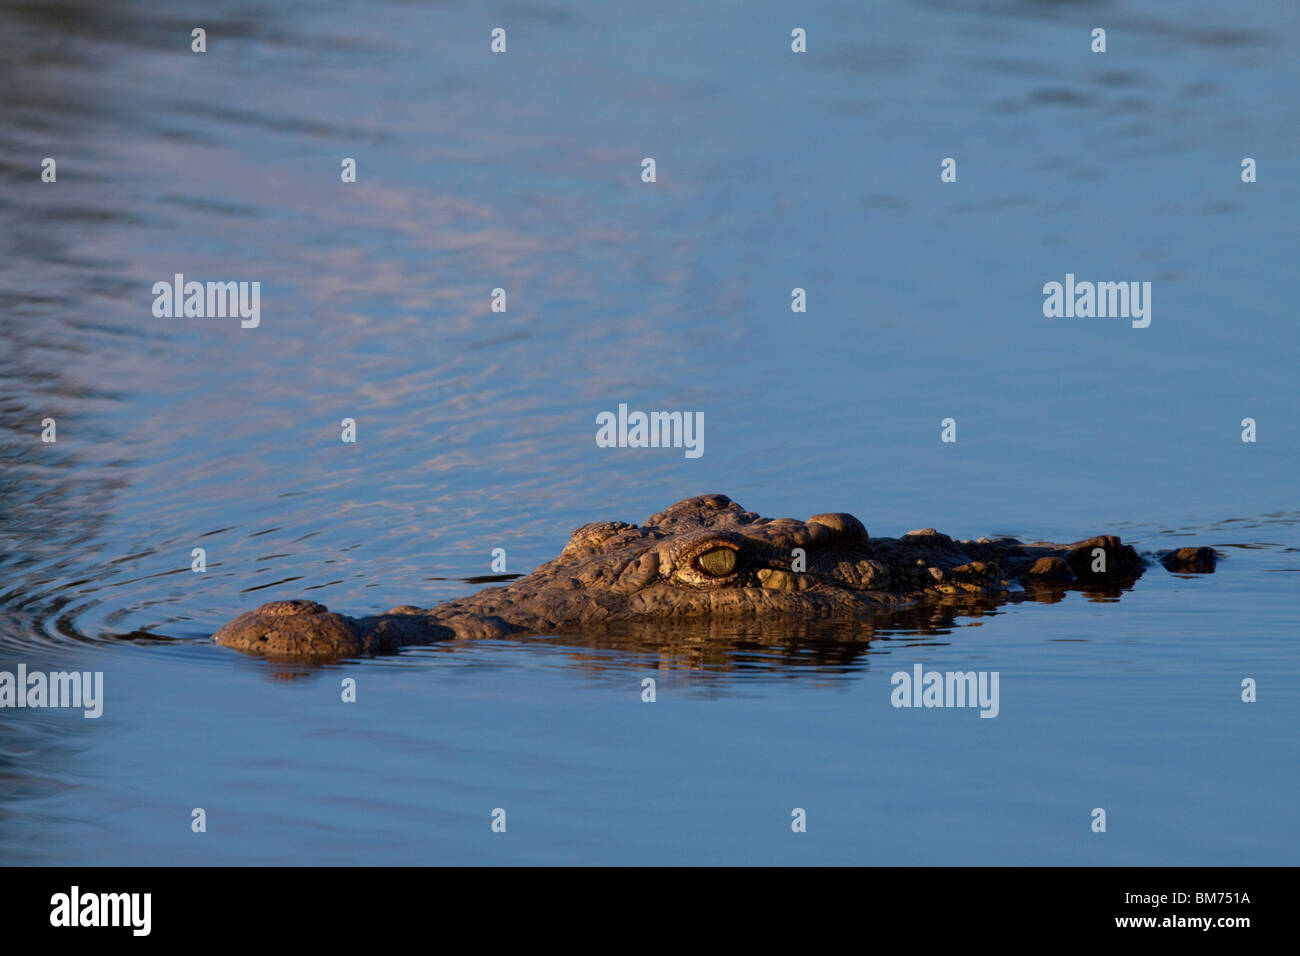 Nile Crocodile (Crocodylus Niloticus). In the water. Greater Kruger National Park, Limpopo, South Africa. Stock Photo